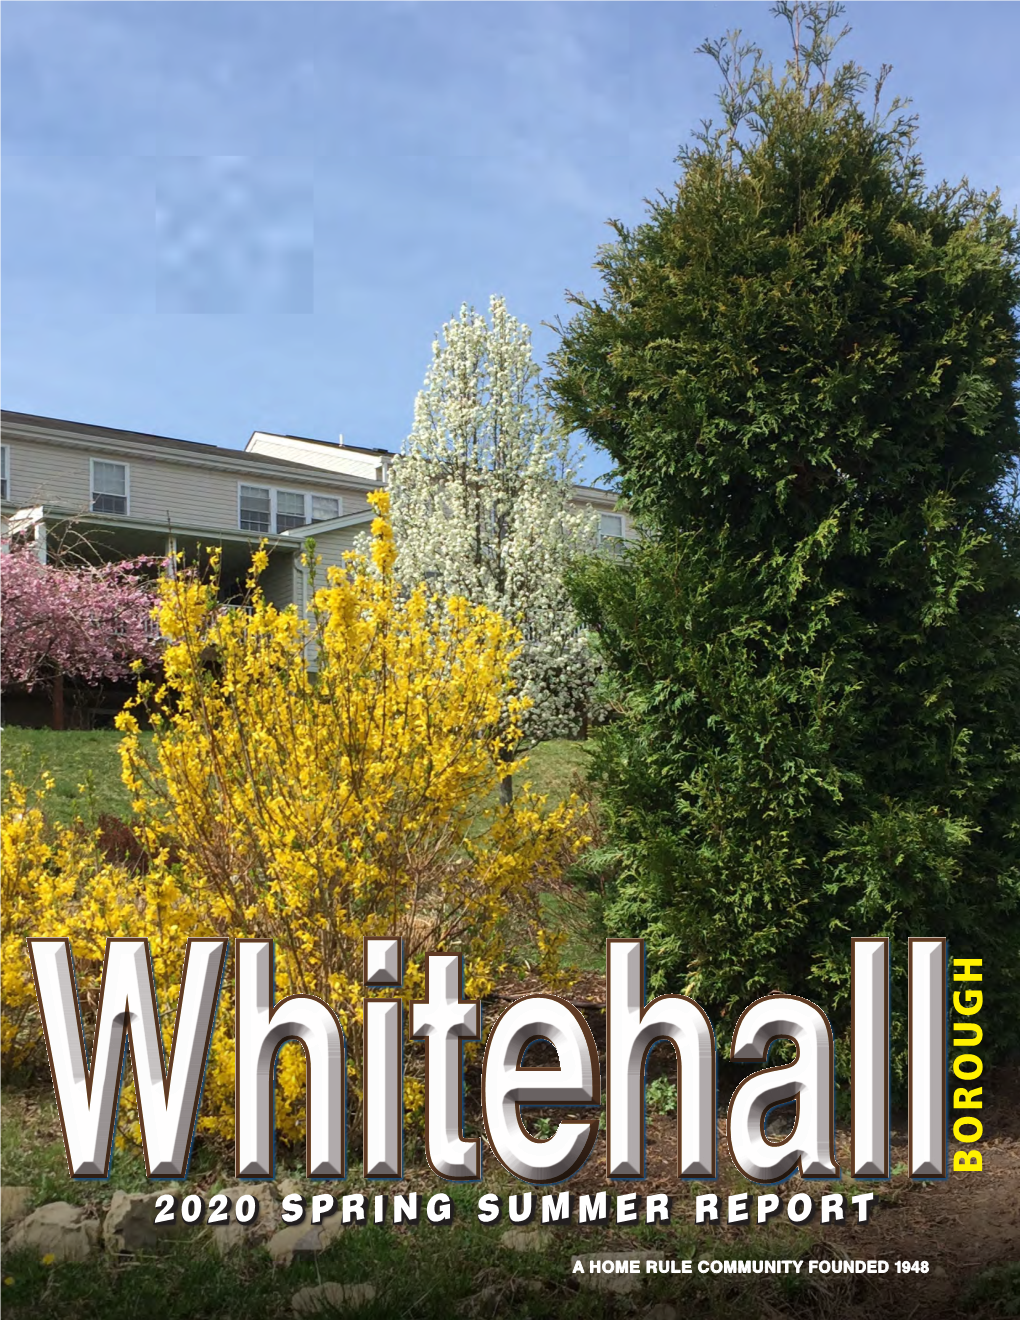 2020 SPRING SUMMER REPORT Whitehalla HOME RULE COMMUNITY FOUNDED 1948 MAYOR WHAT RESIDENTS CAN DO to JIM IMPROVE and BEAUTIFY NOWALK Whitehall Borough